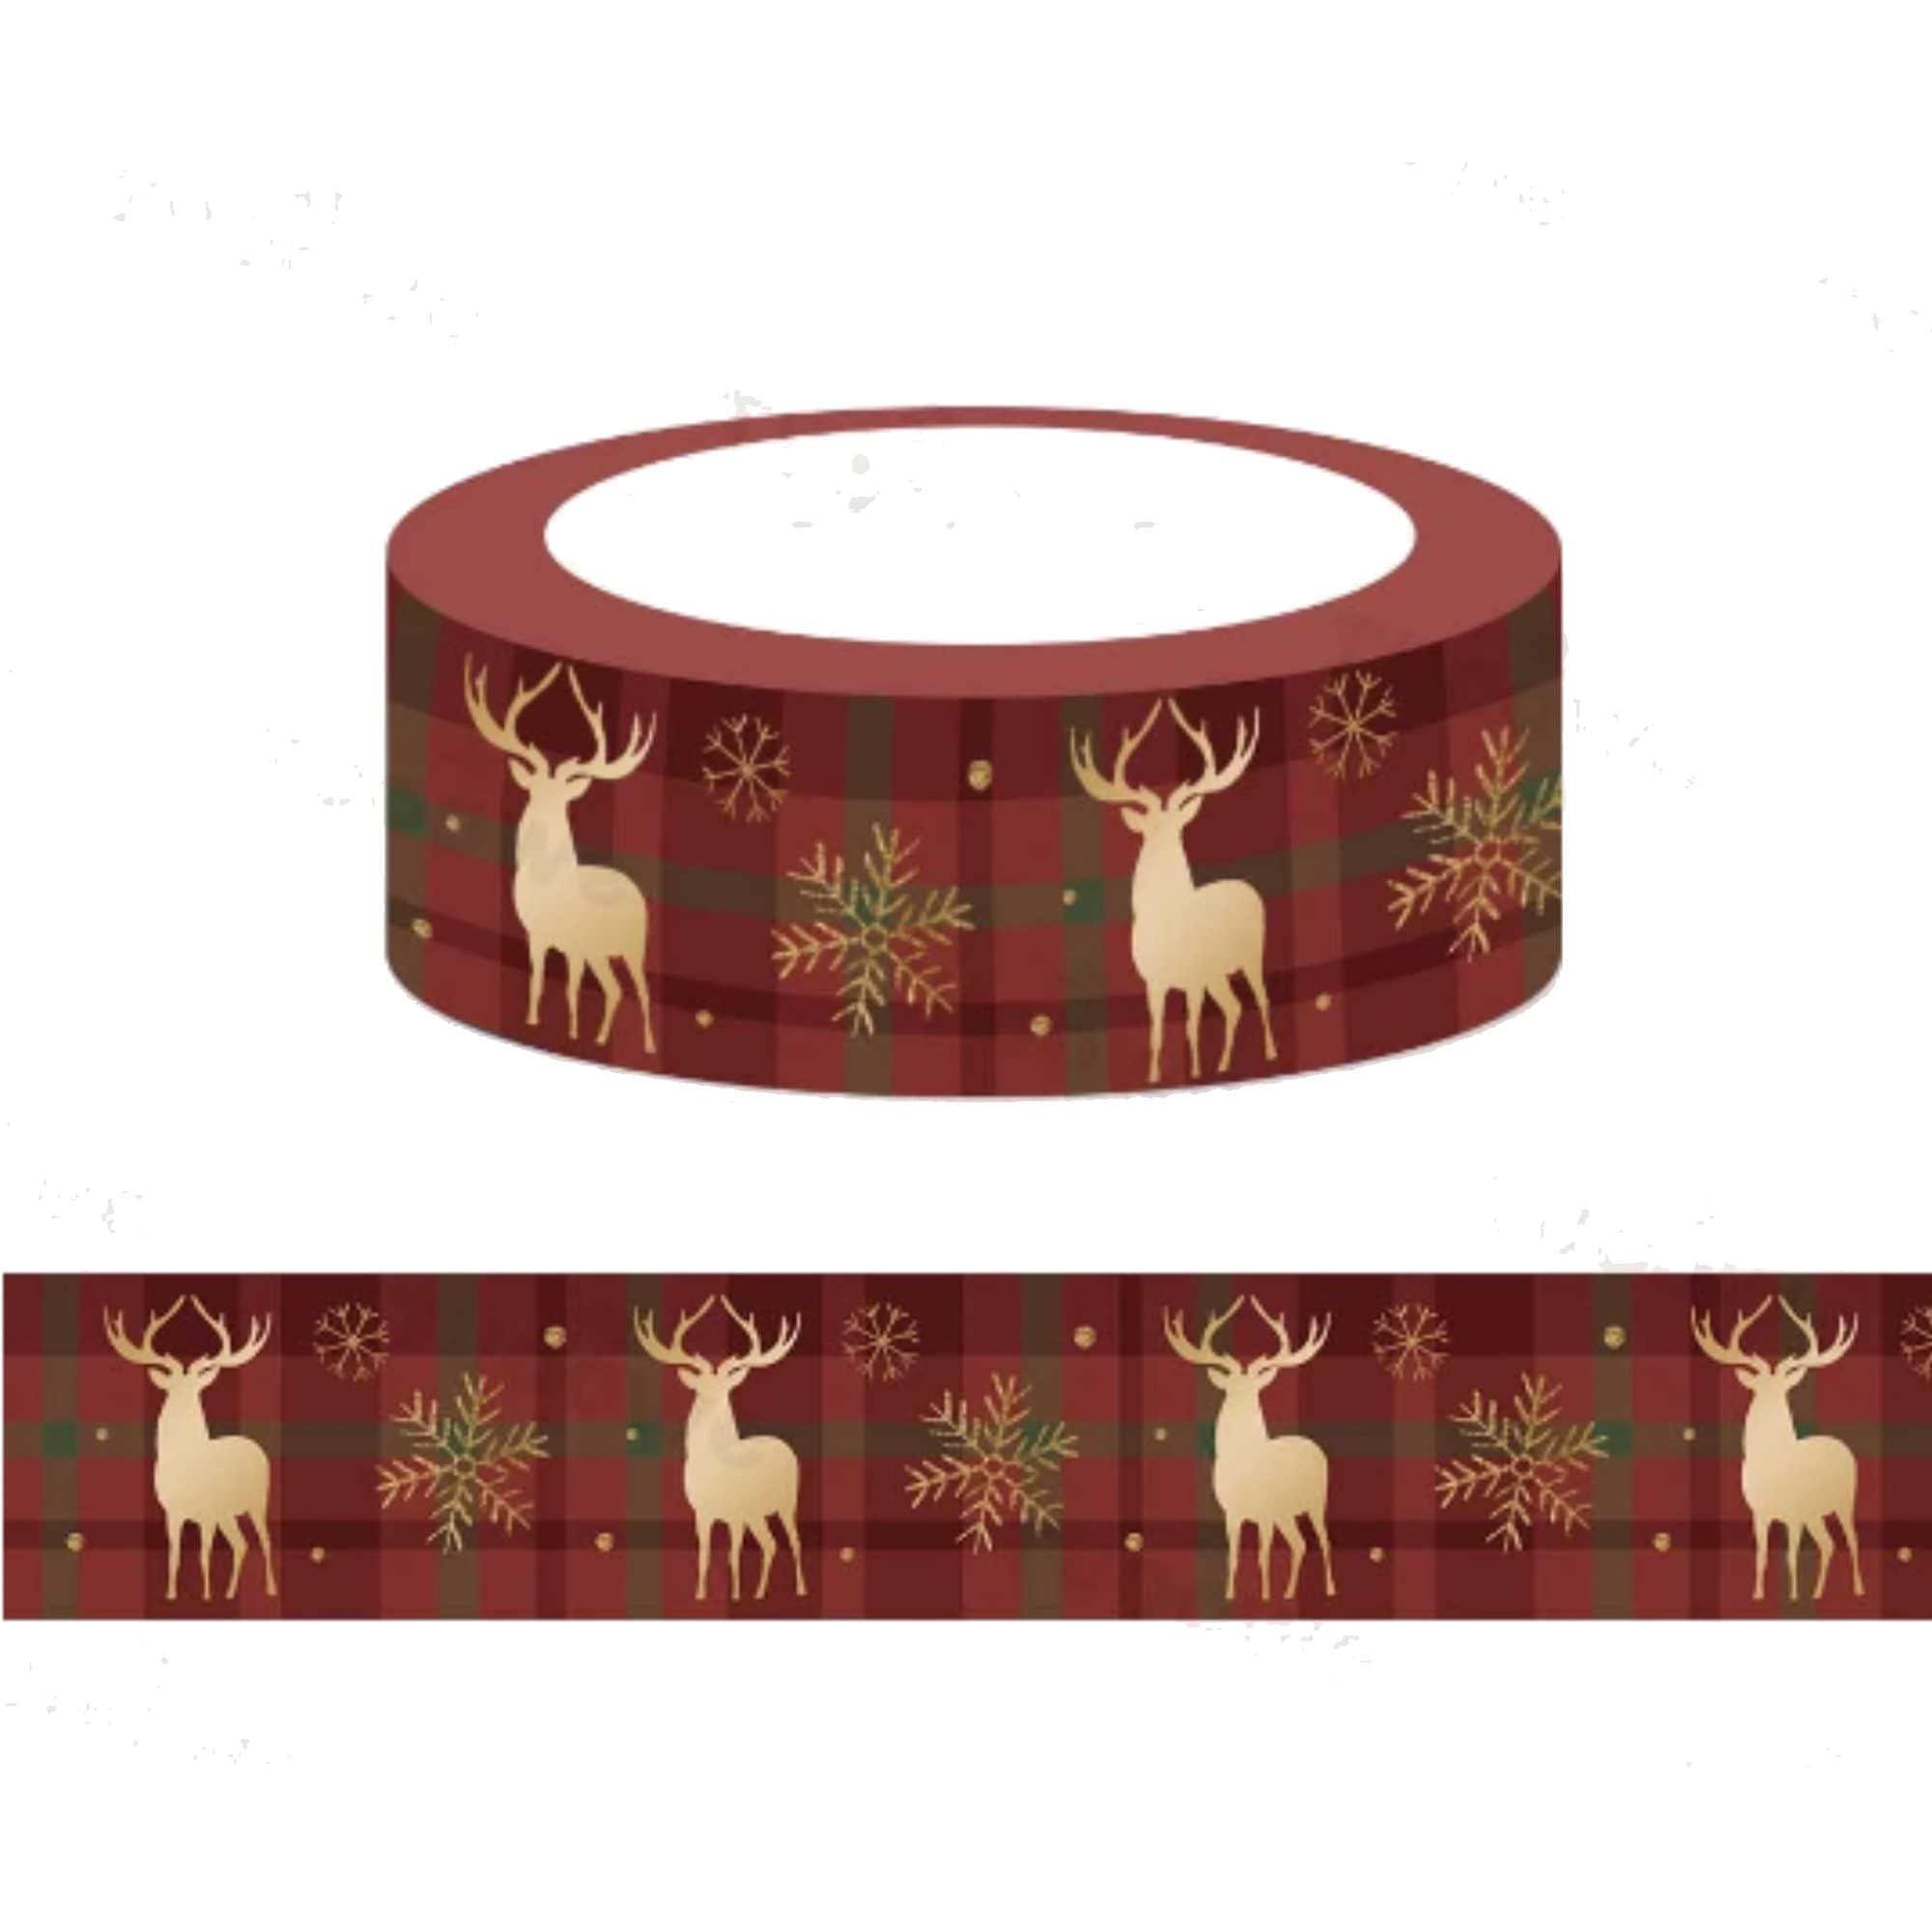 TW Collection Christmas Reindeer Gold Foiled Washi Tape by SSC Designs - 15mm x 30 Feet